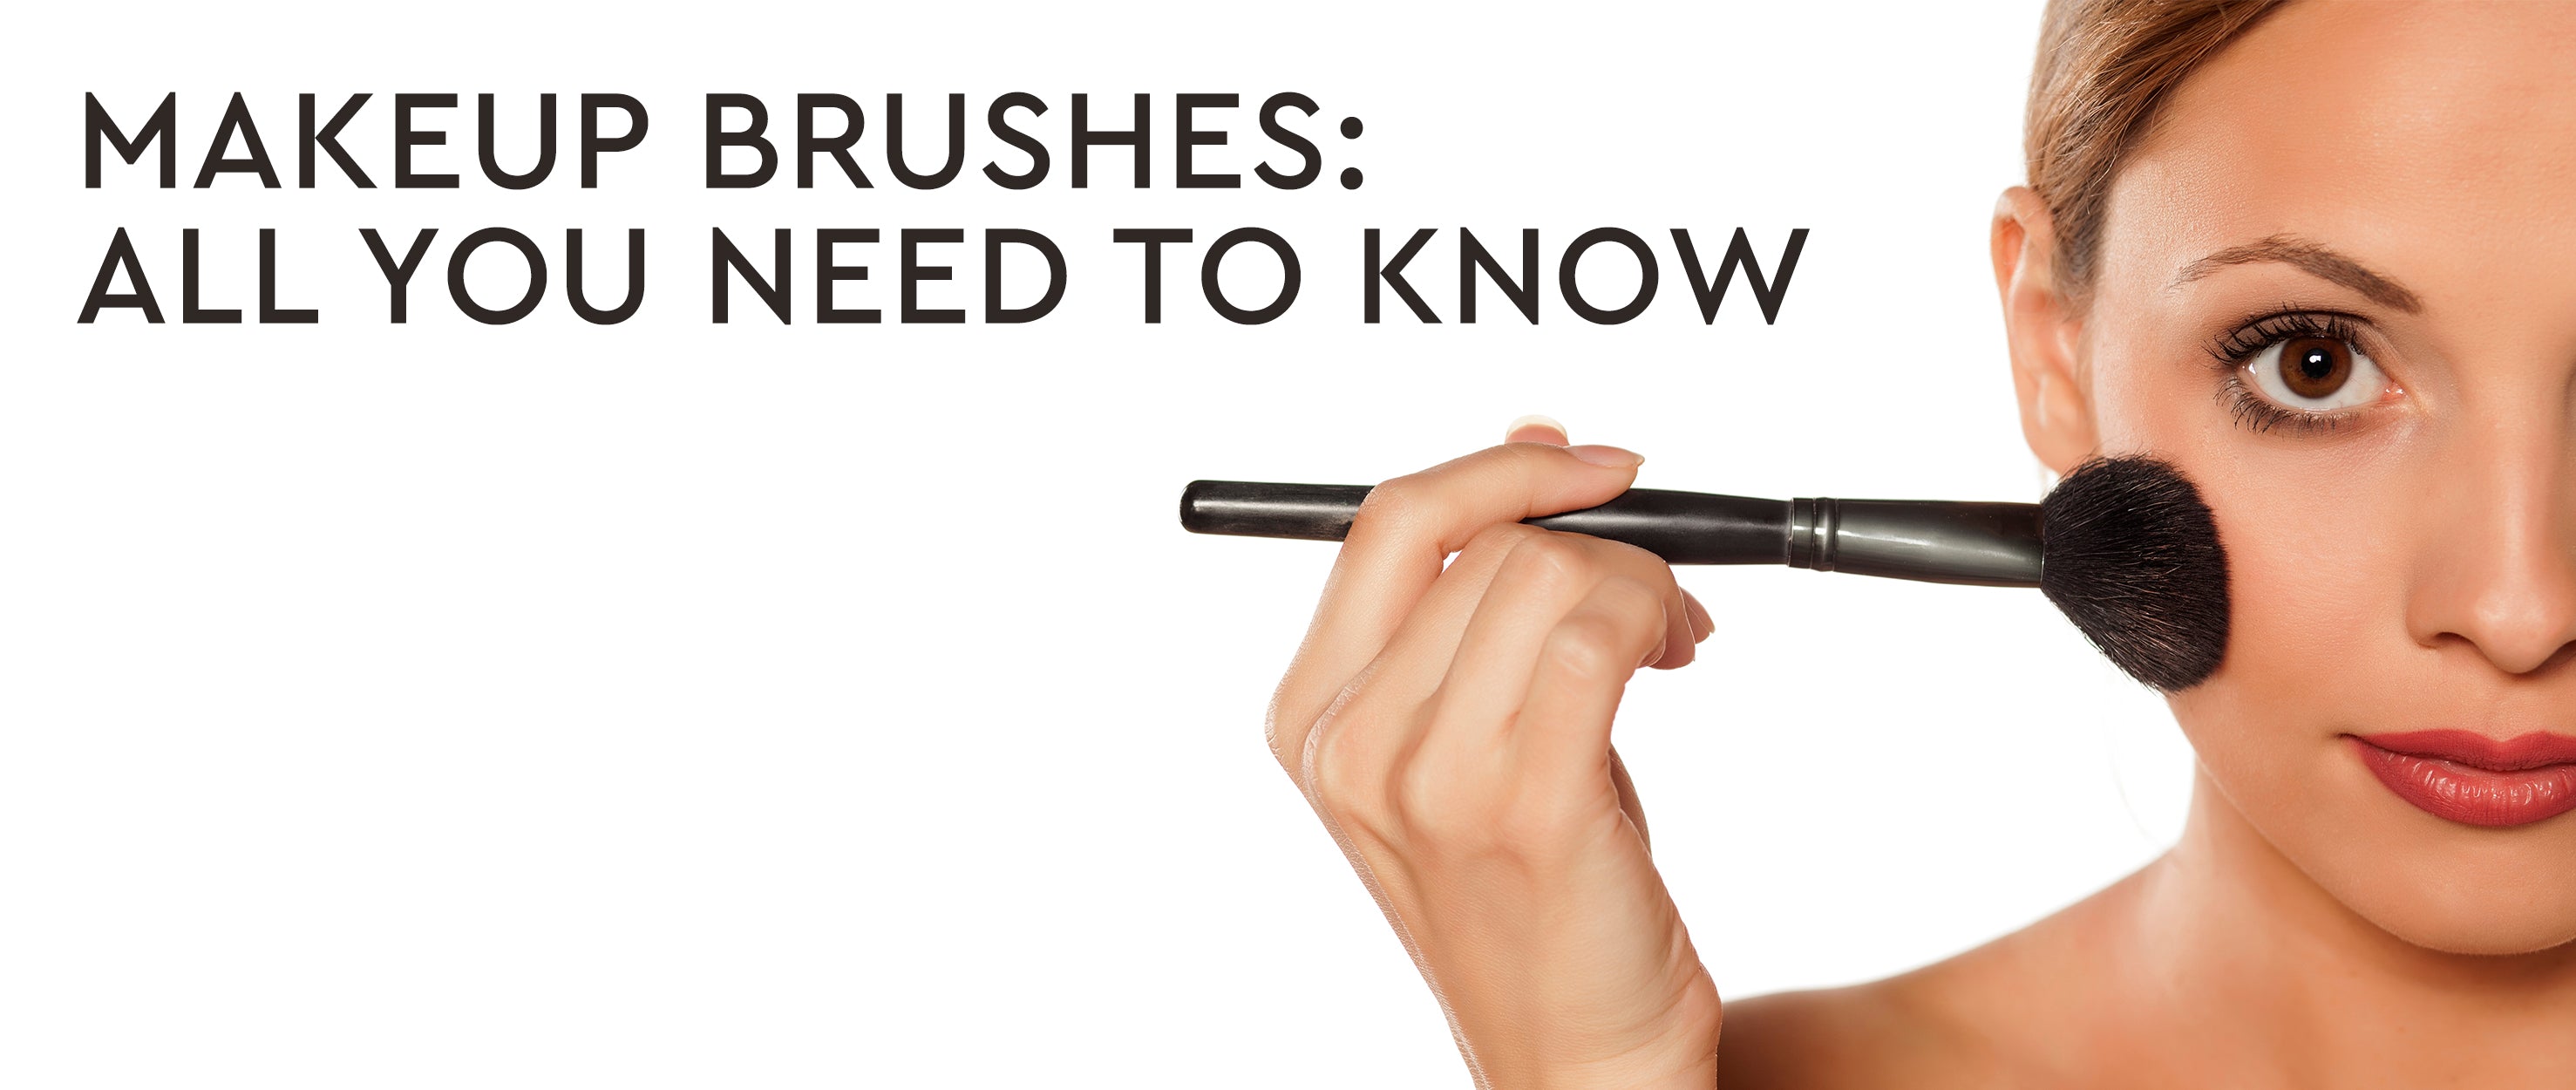 8 Investment Worthy Makeup Brushes